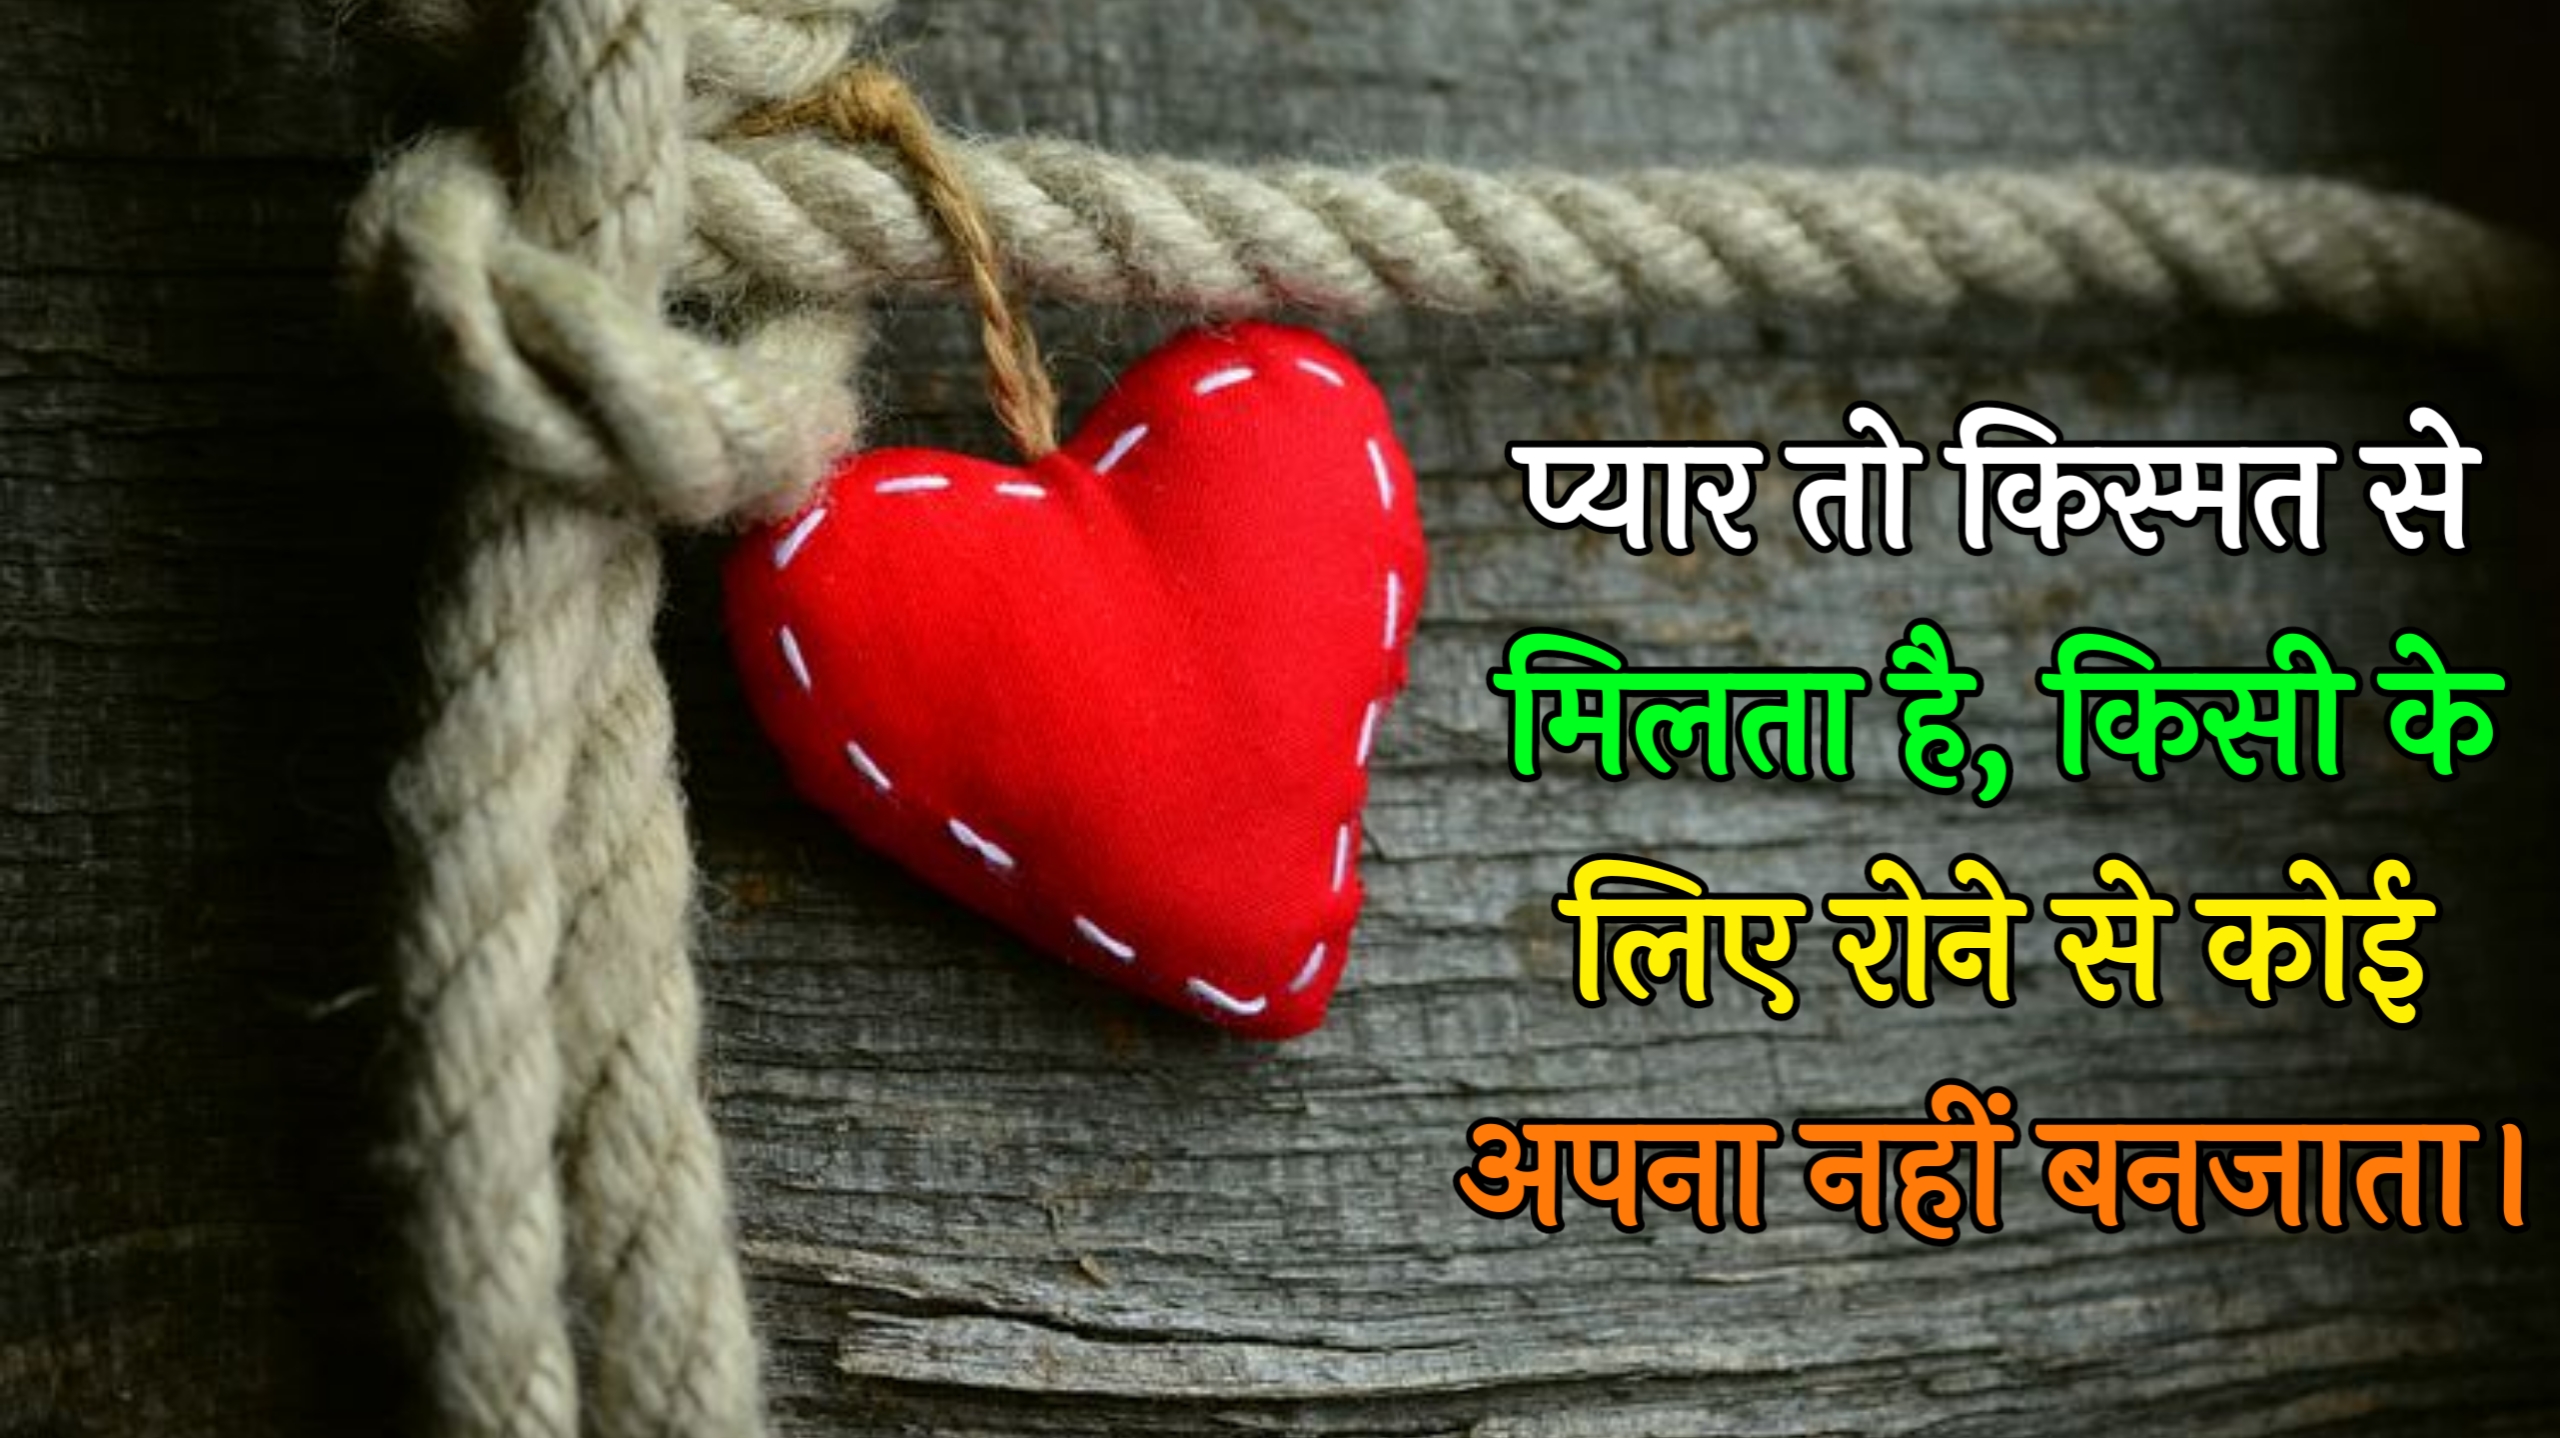 heart touching love quotes in hindi,deep heart touching love quotes in hindi,emotional heart touching love quotes in hindi,heart touching love quotes in hindi english,sad heart touching love quotes in hindi,heart touching true love heart touching love quotes in hindi,love quotes in hindi 2023